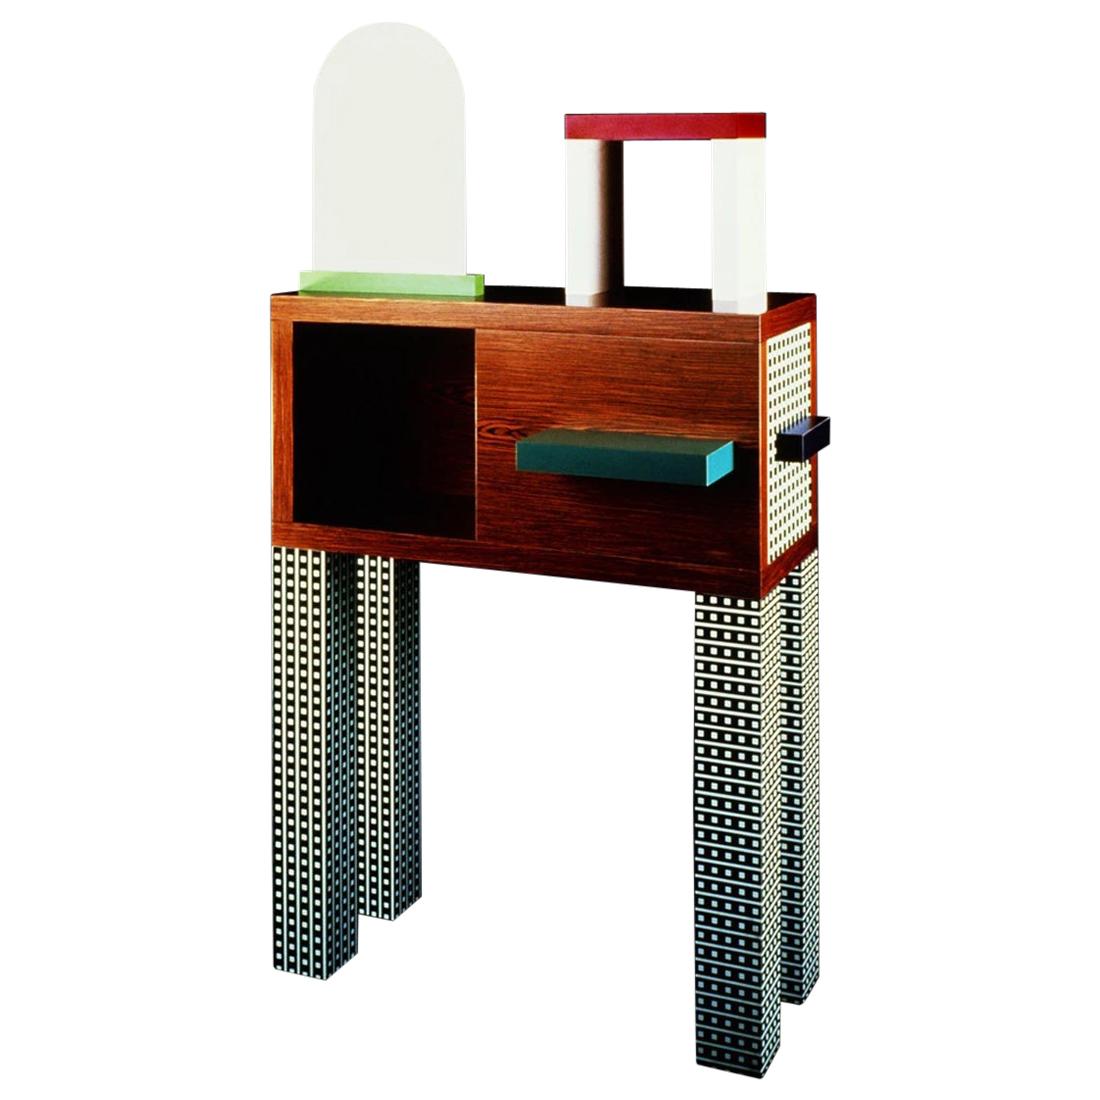 Emerald Side Table, by Nathalie du Pasquier for Memphis Milano Collection